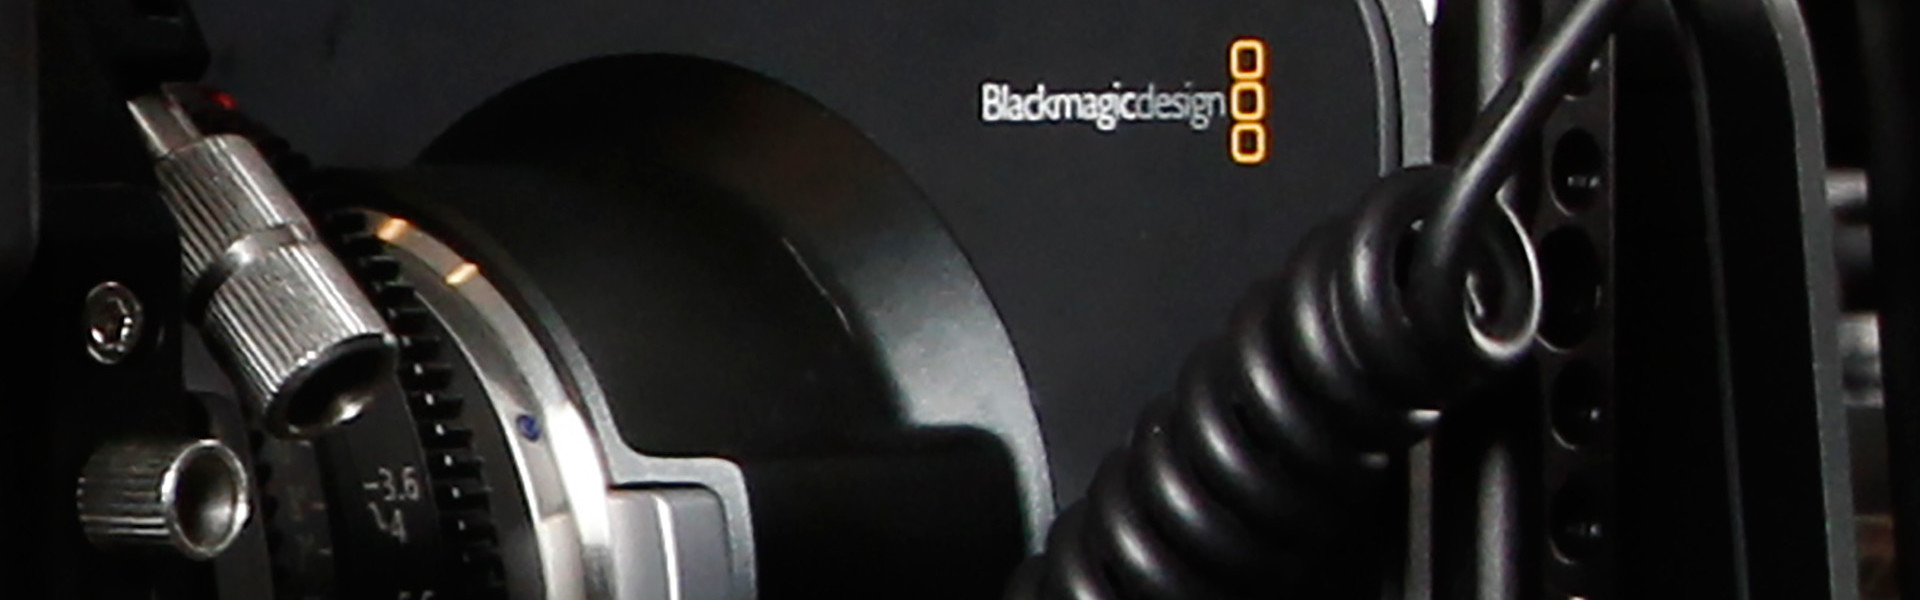 Header image for article Lenses and Accessories for the Blackmagic Cinema Camera